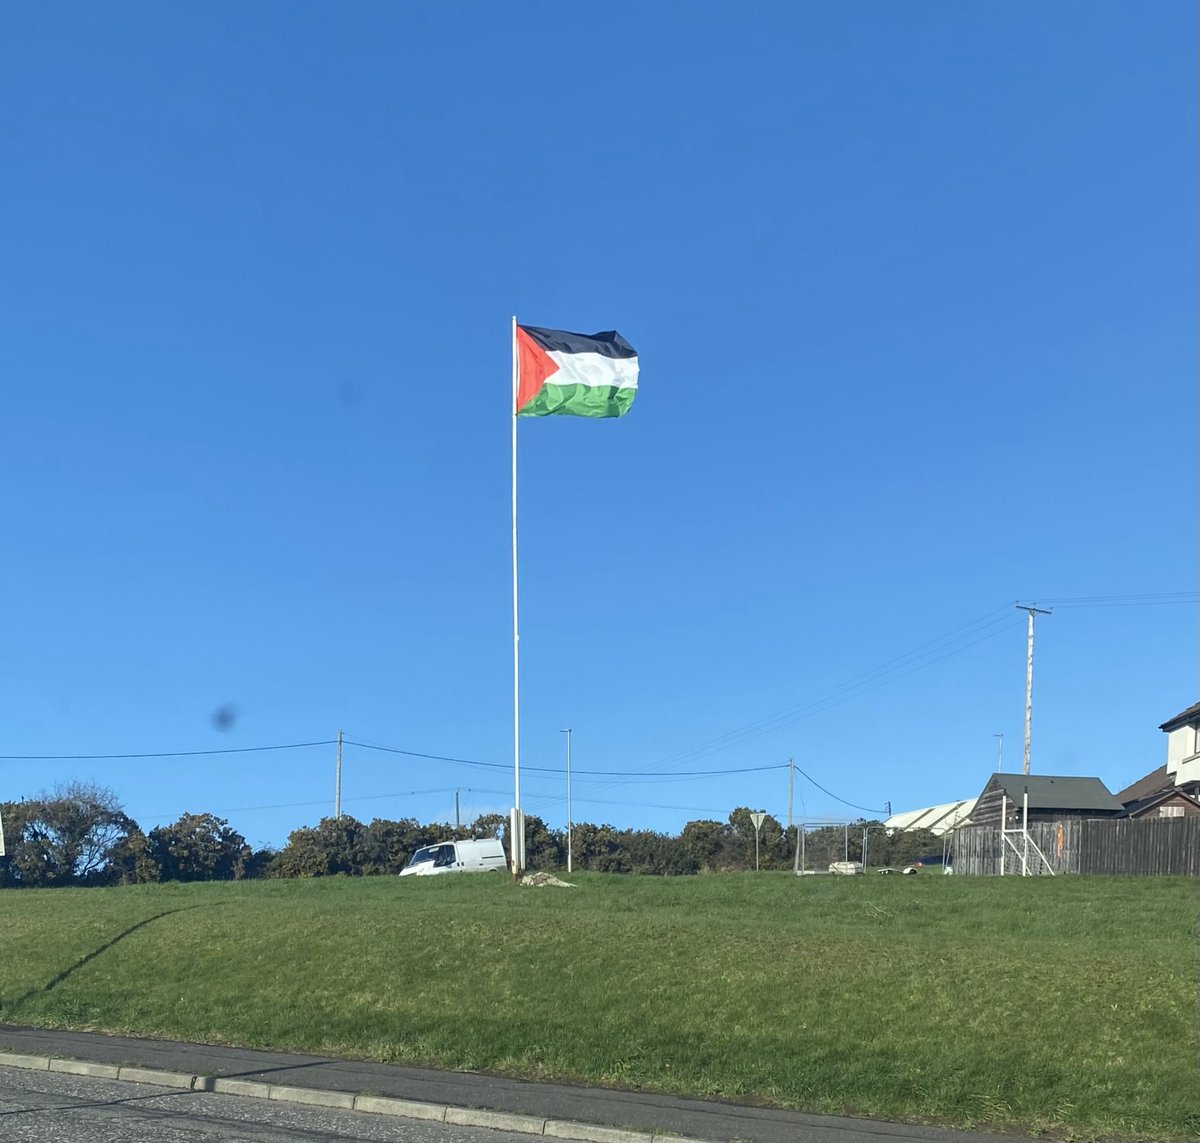 Humanity Will Prevail - #Newry says Long Live Palestine❗️🍉 #CeaseFireNow